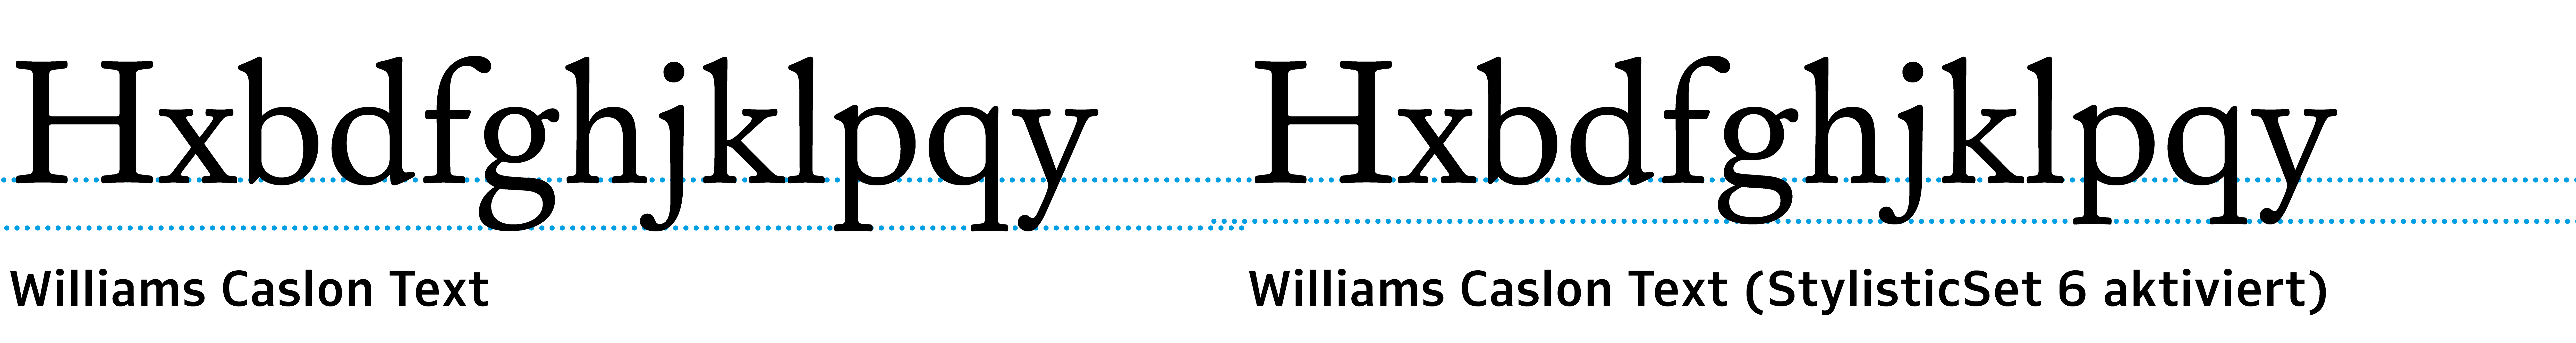 Hxdbqp_WilliamsCaslonText.png